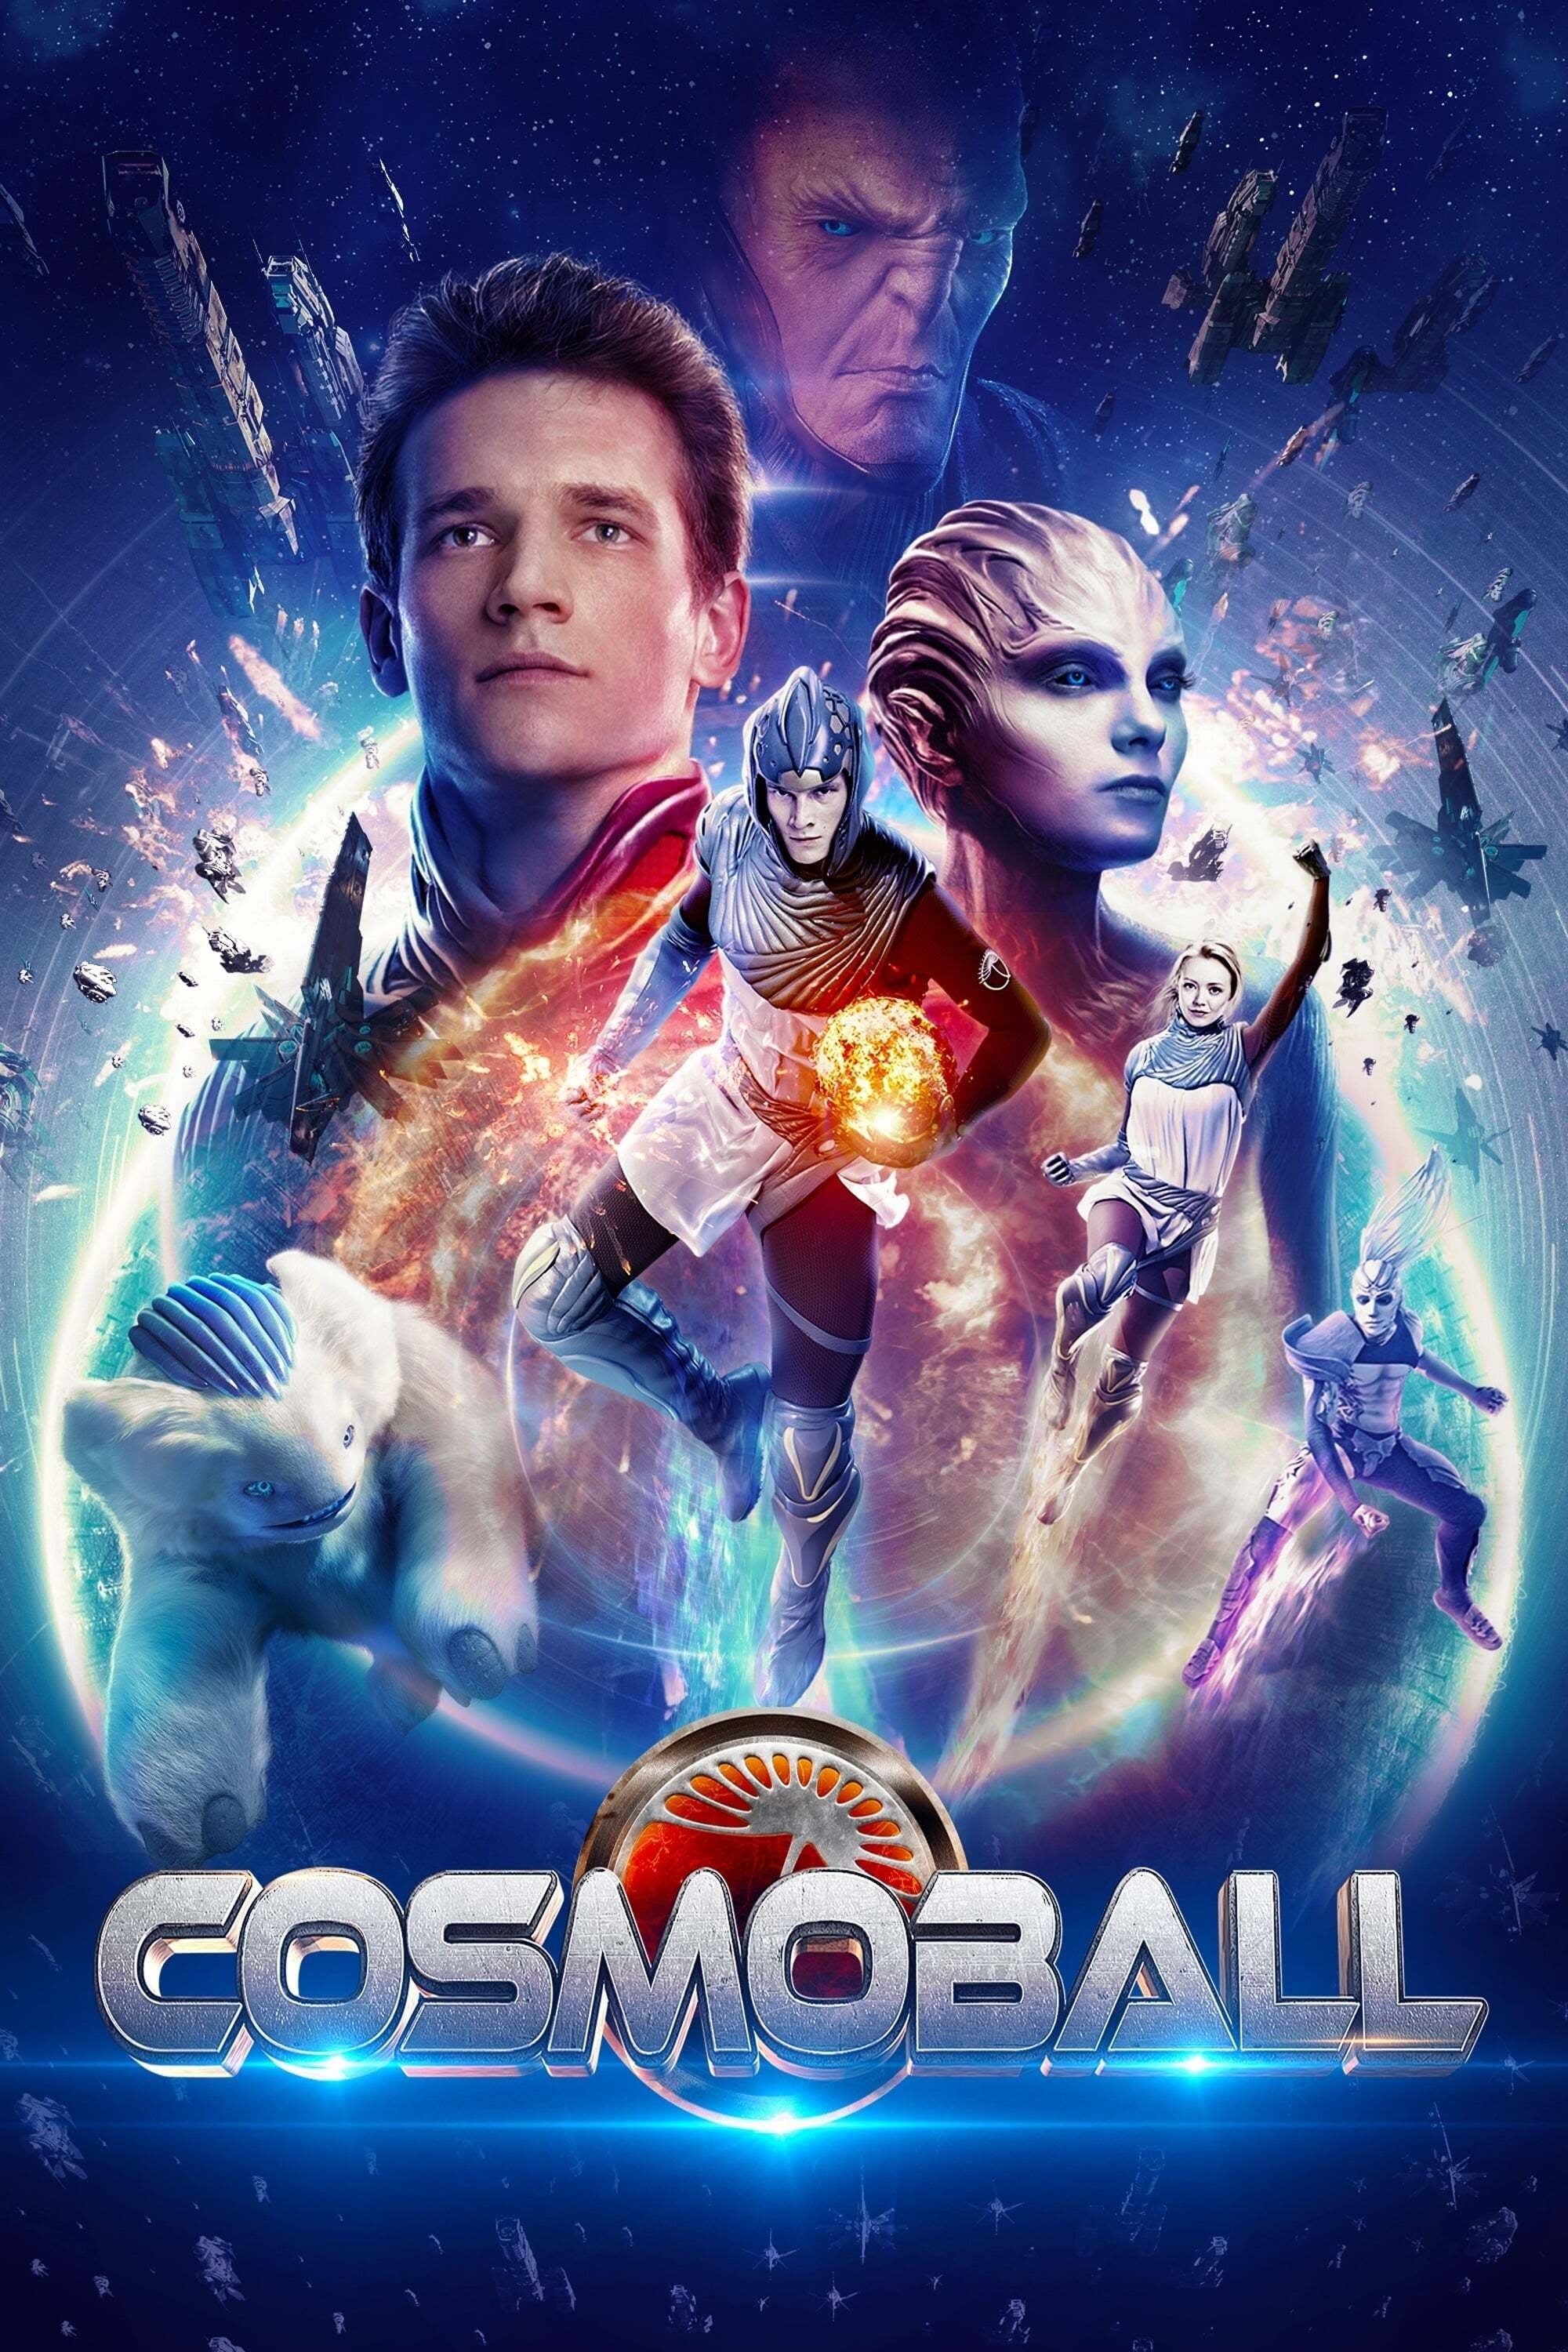 trailer du film cosmoball cosmoball bande annonce vf cineseries